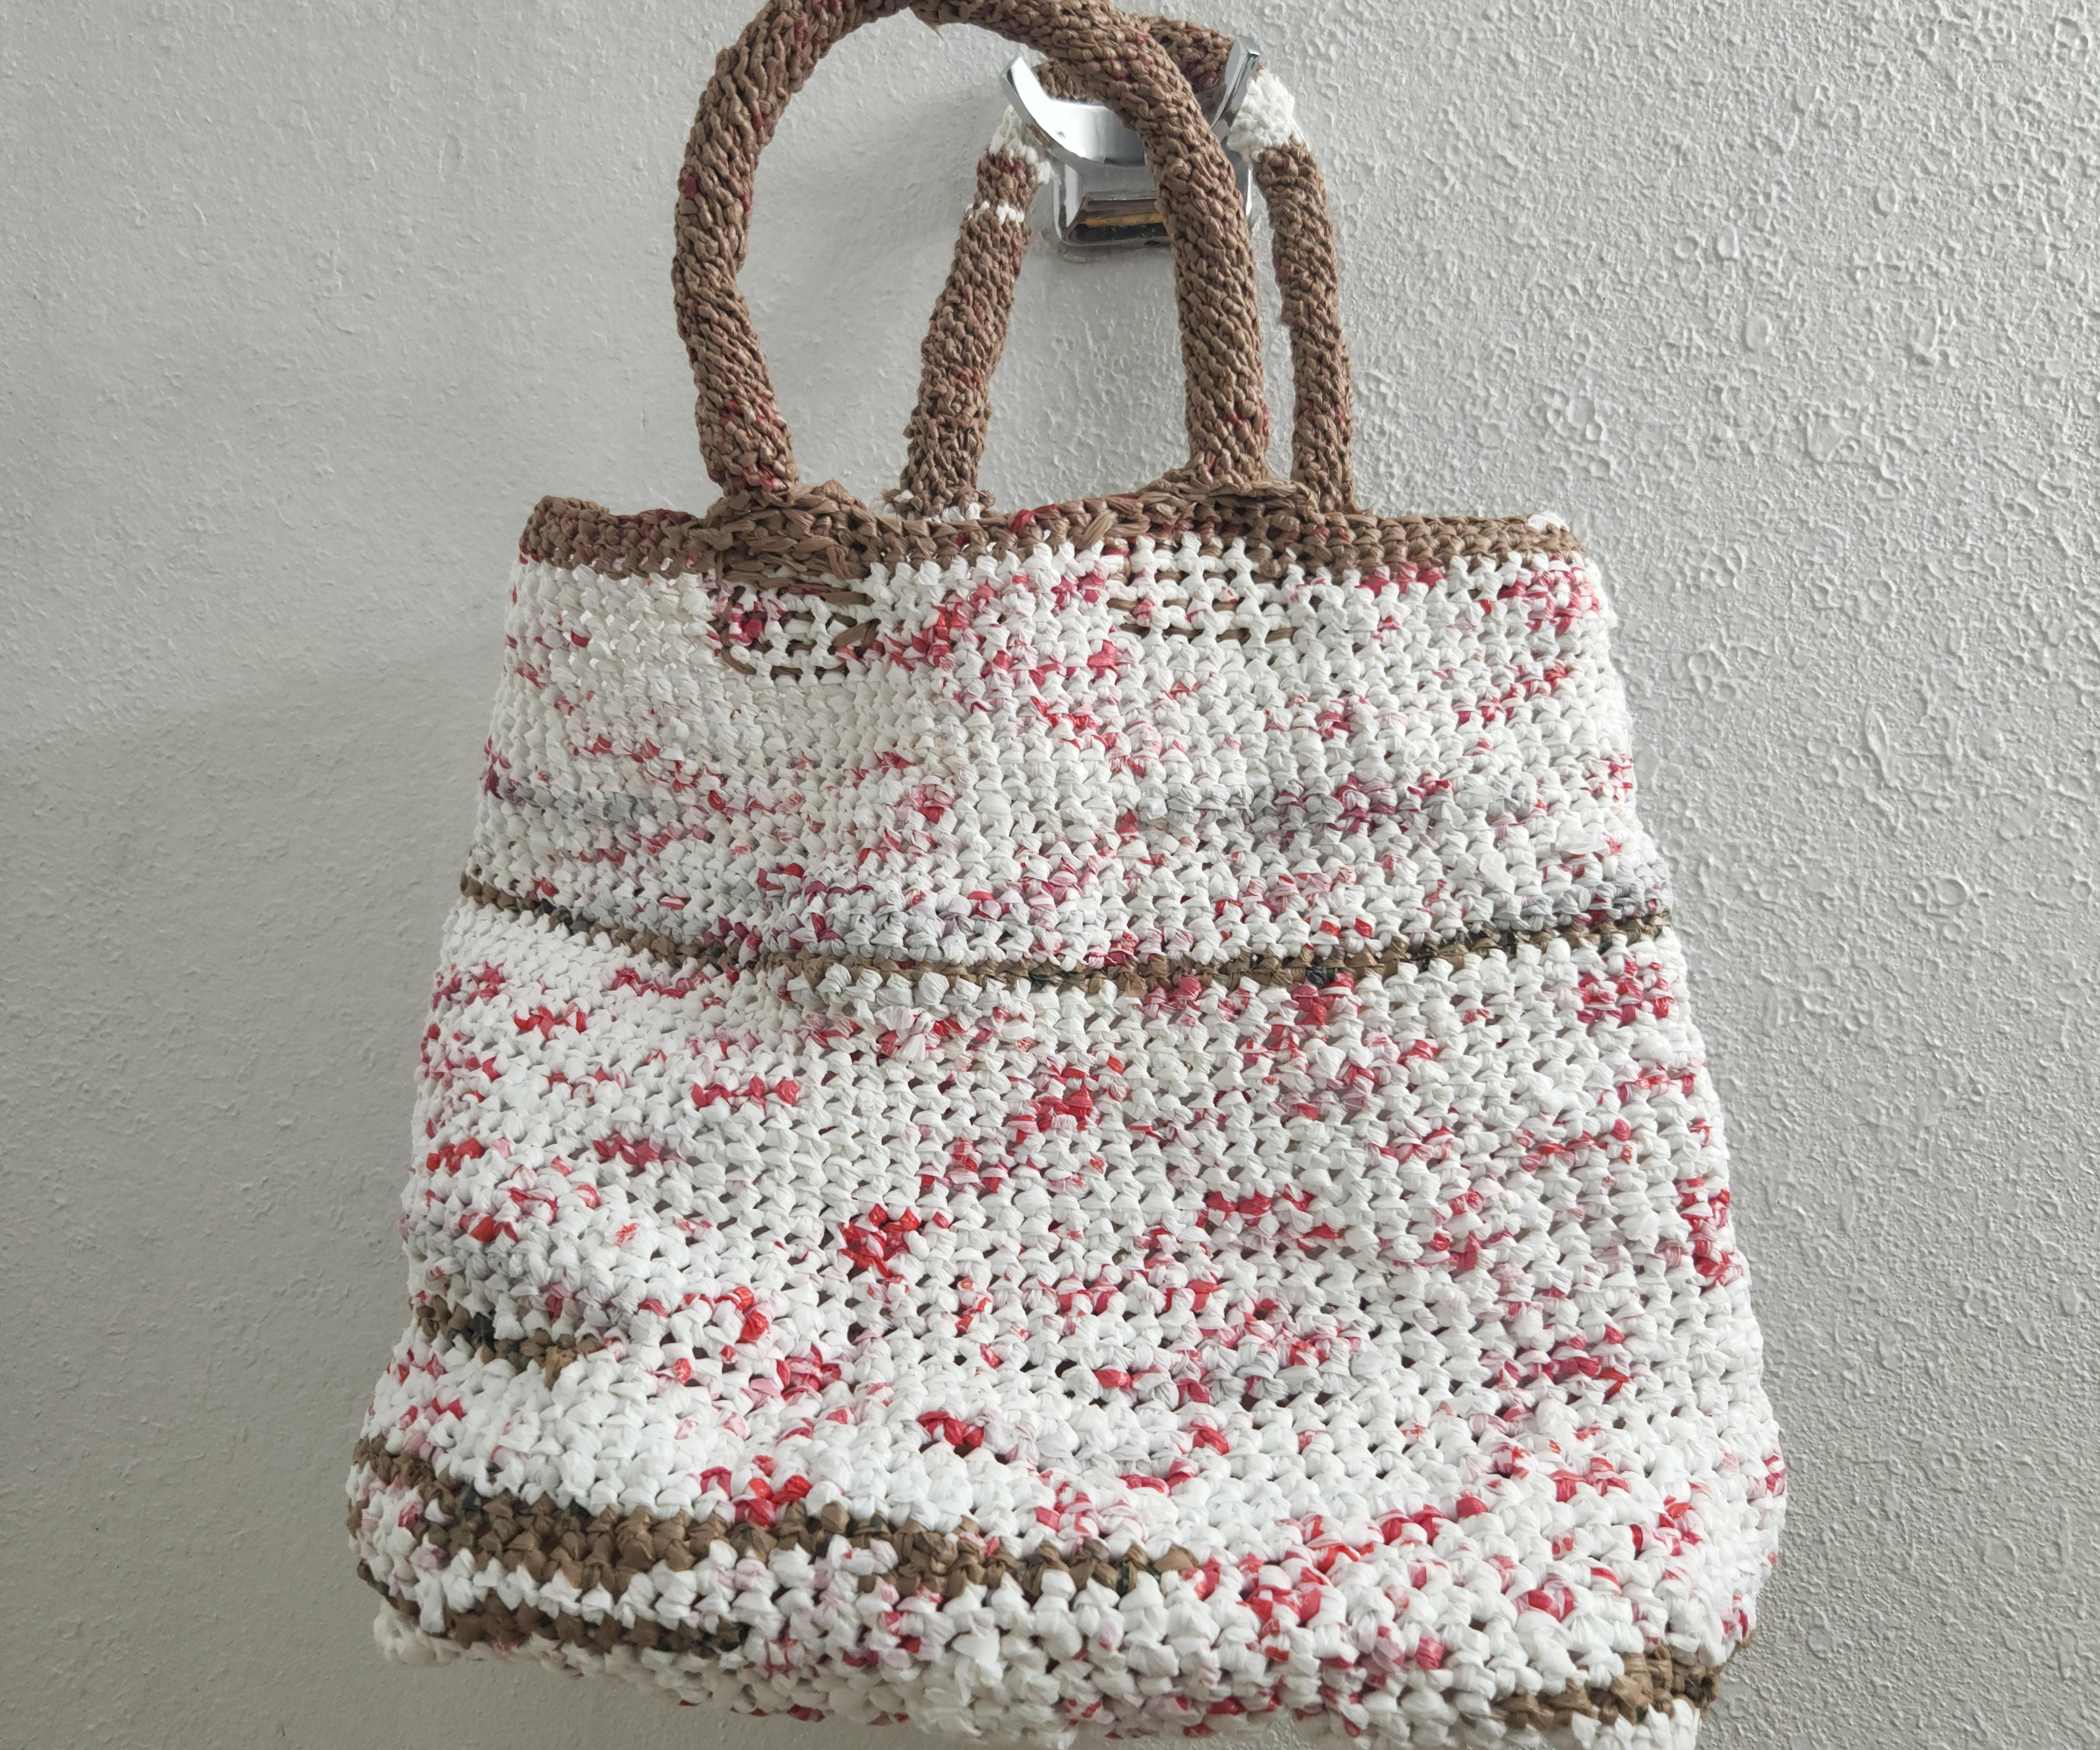 Plastic to Fantastic -- Crocheting a Reusable Shopping Bag From Single-Use Grocery Bags